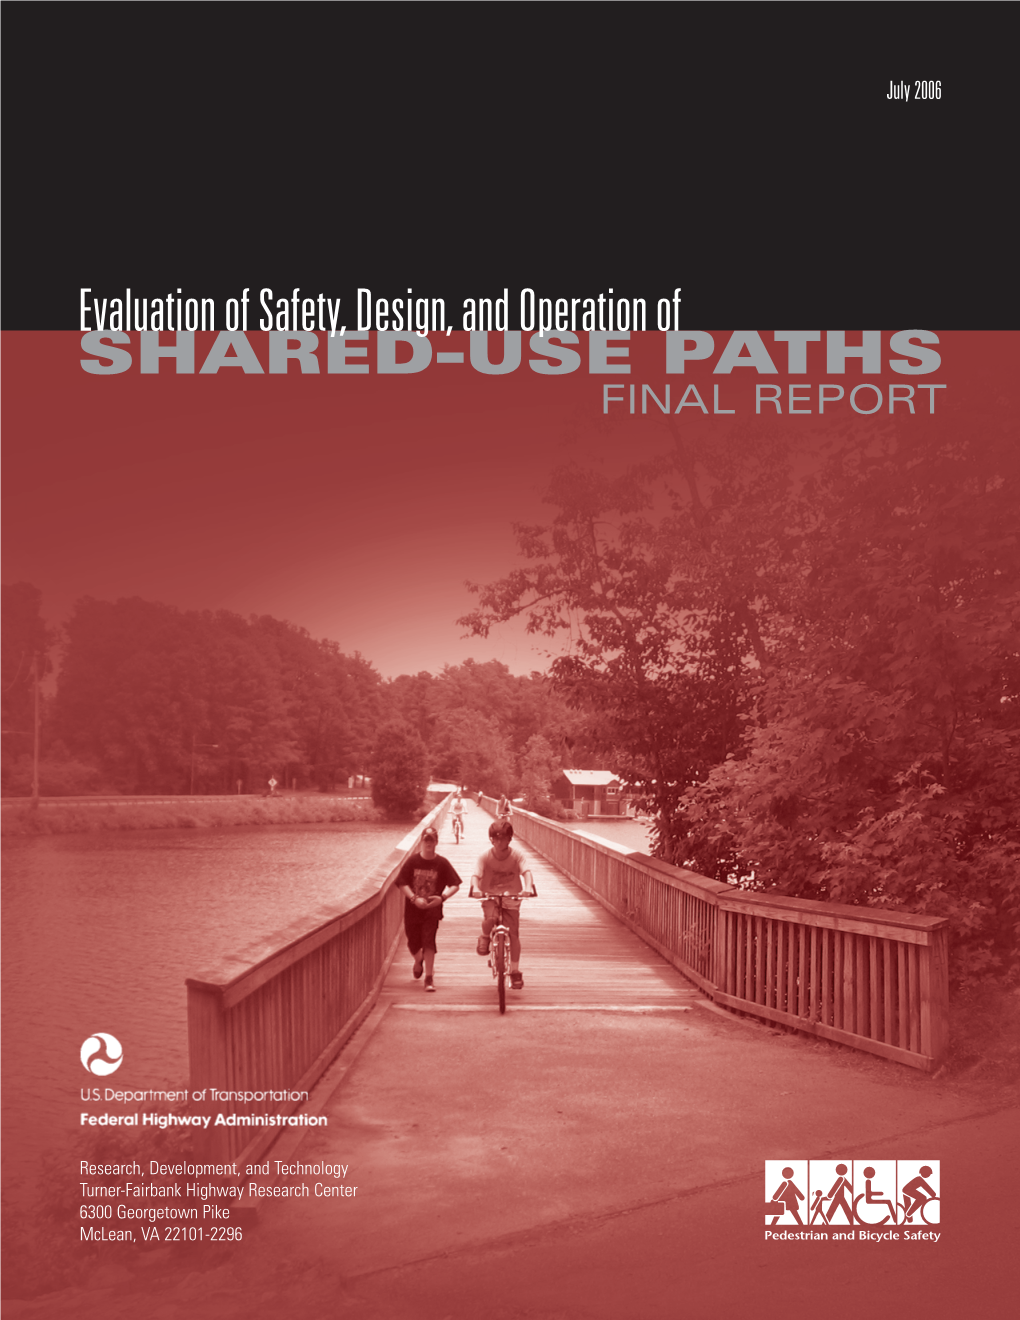 Evaluation of Safety, Design, and Operation of SHARED-USE PATHS FINAL REPORT